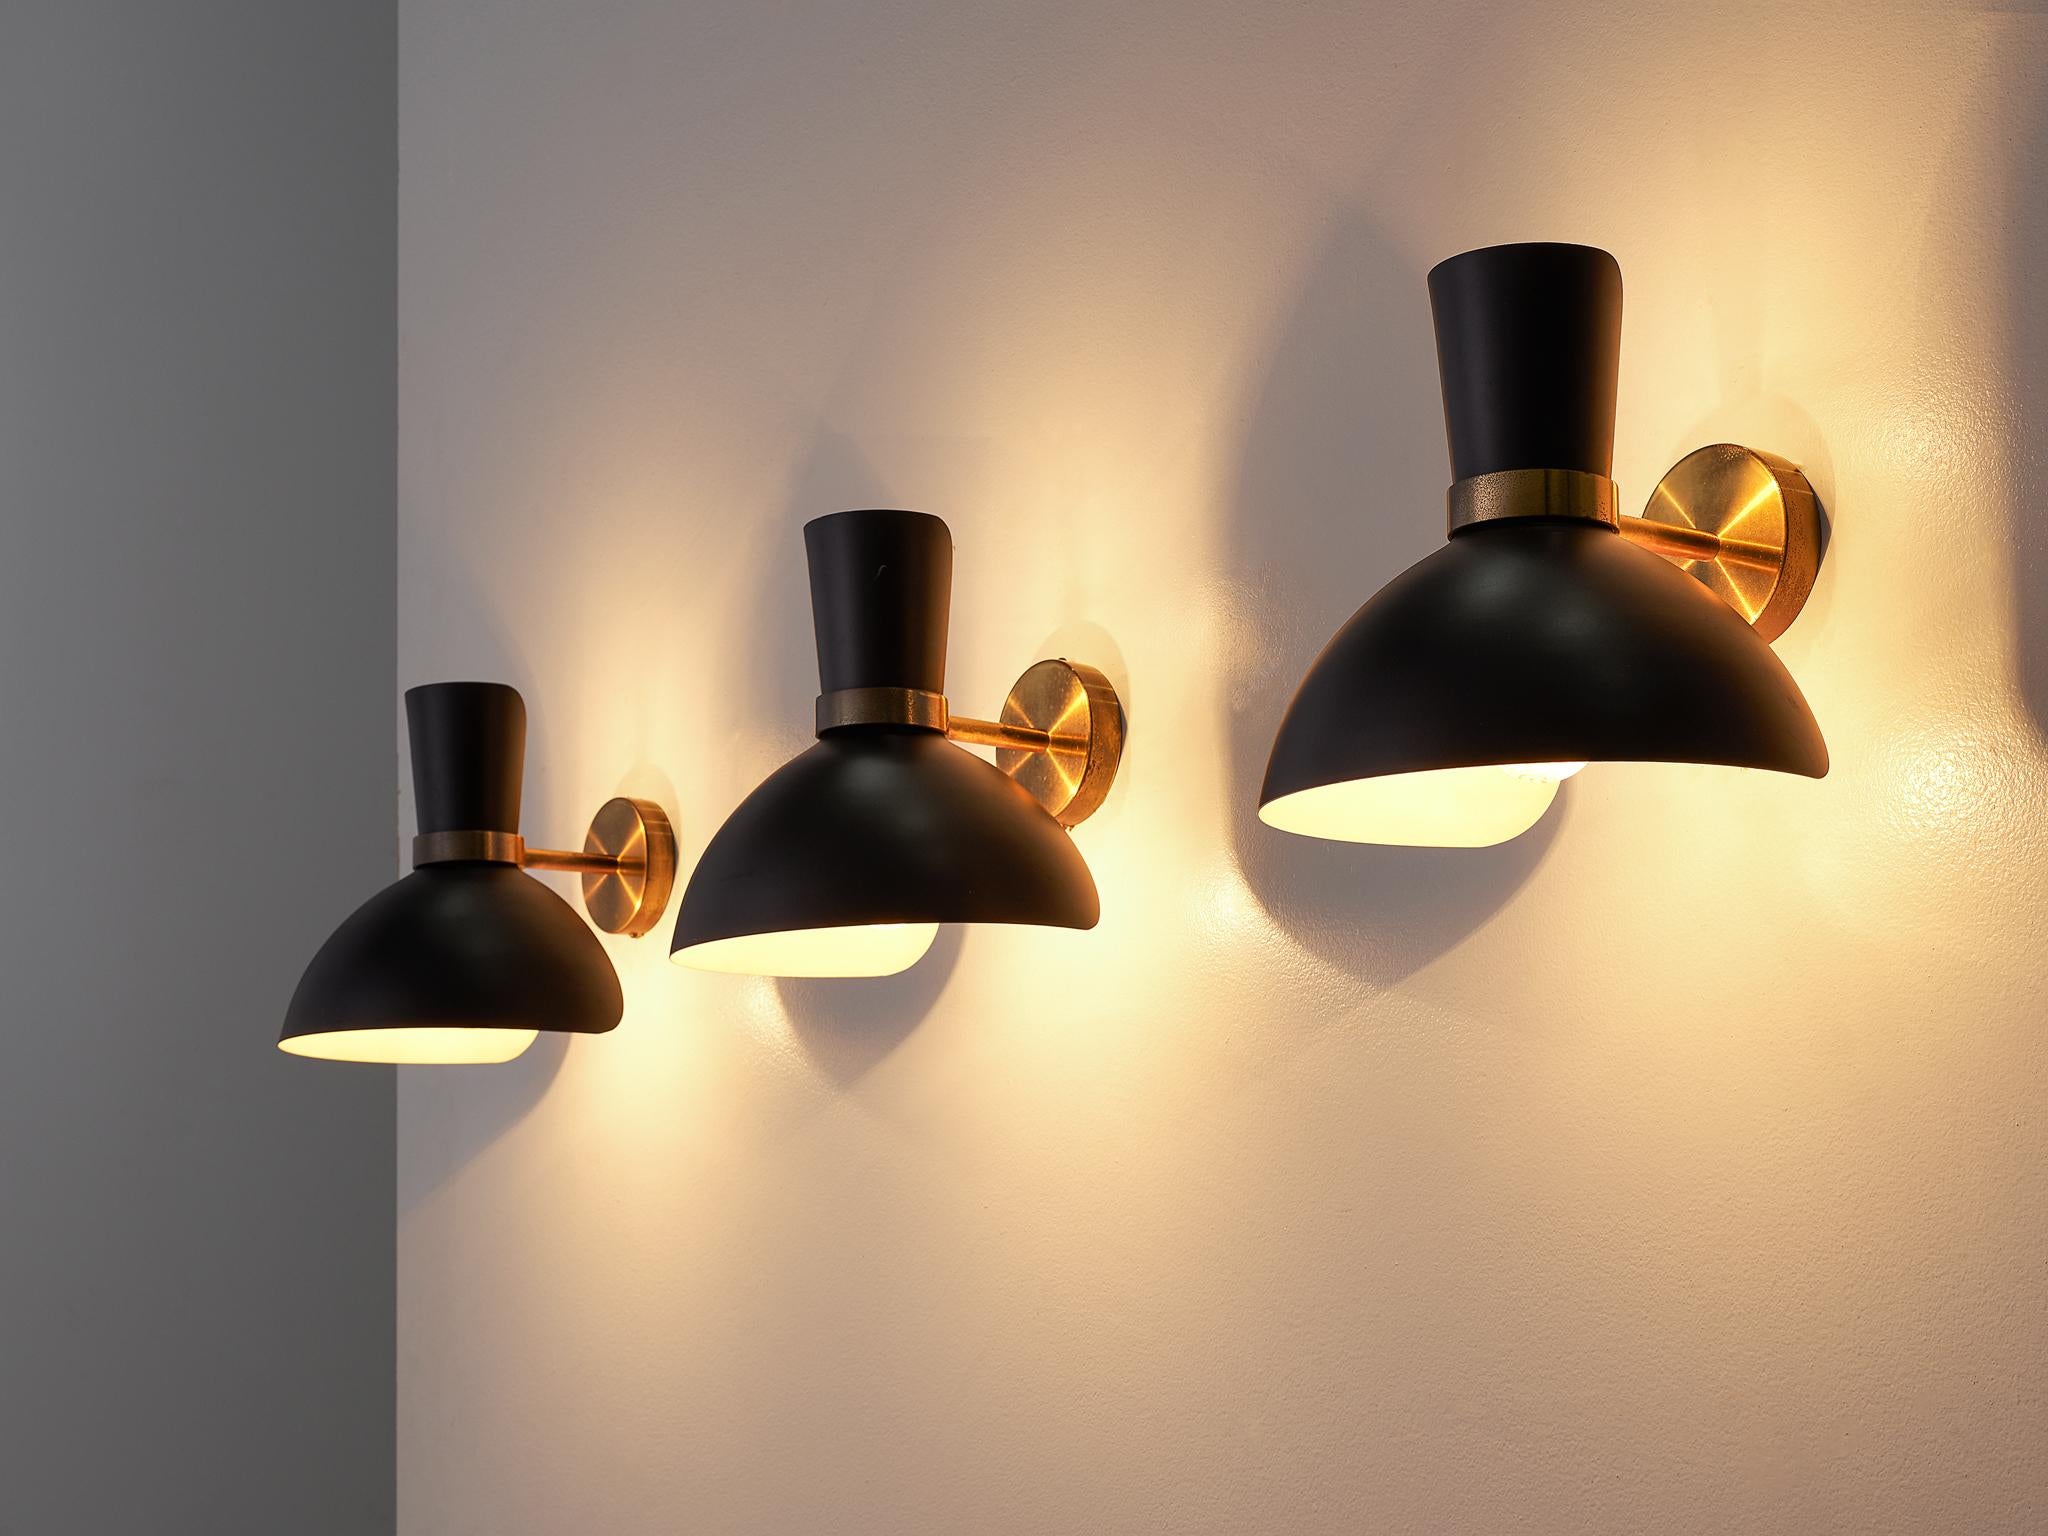 Set of wall lights, brass stem and black coated shade, Scandinavia, 1960s. 

These wall lights feature a classic shade in black with a round brass stem. The brass features a delicate patina that contributes to the warm, elegant design of these